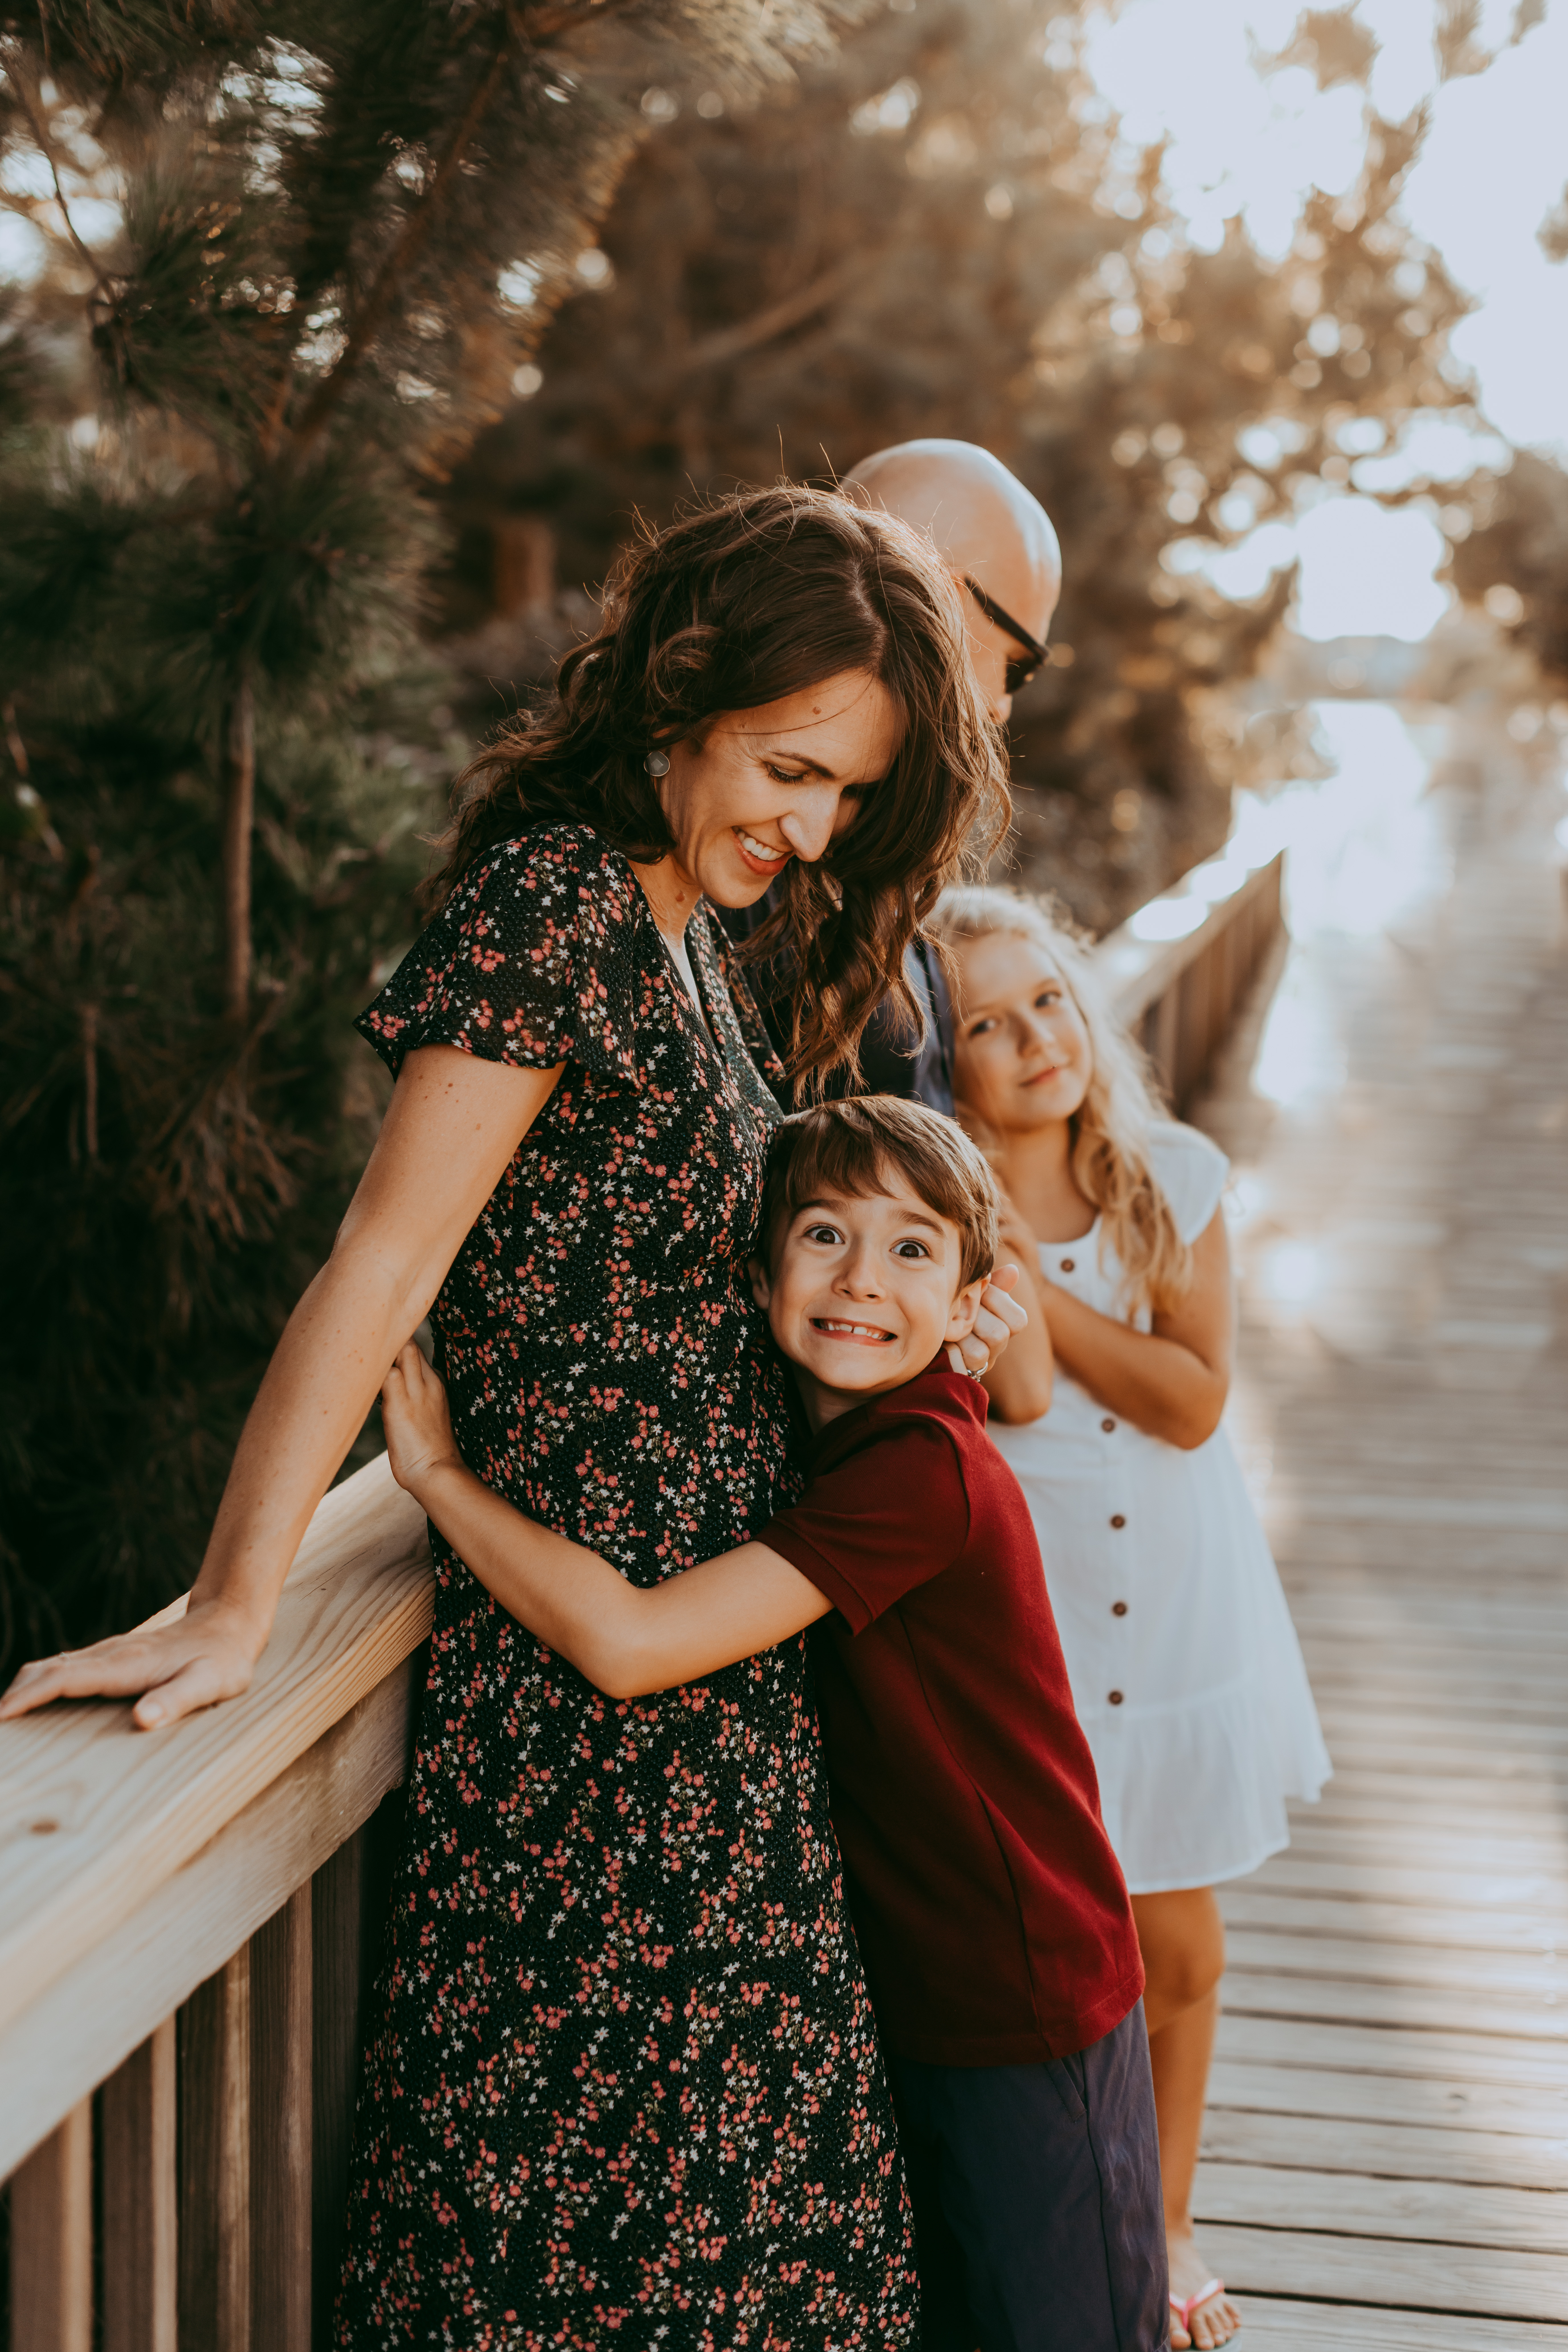 fun candid moment heading to the beach by Laura Walter Photography